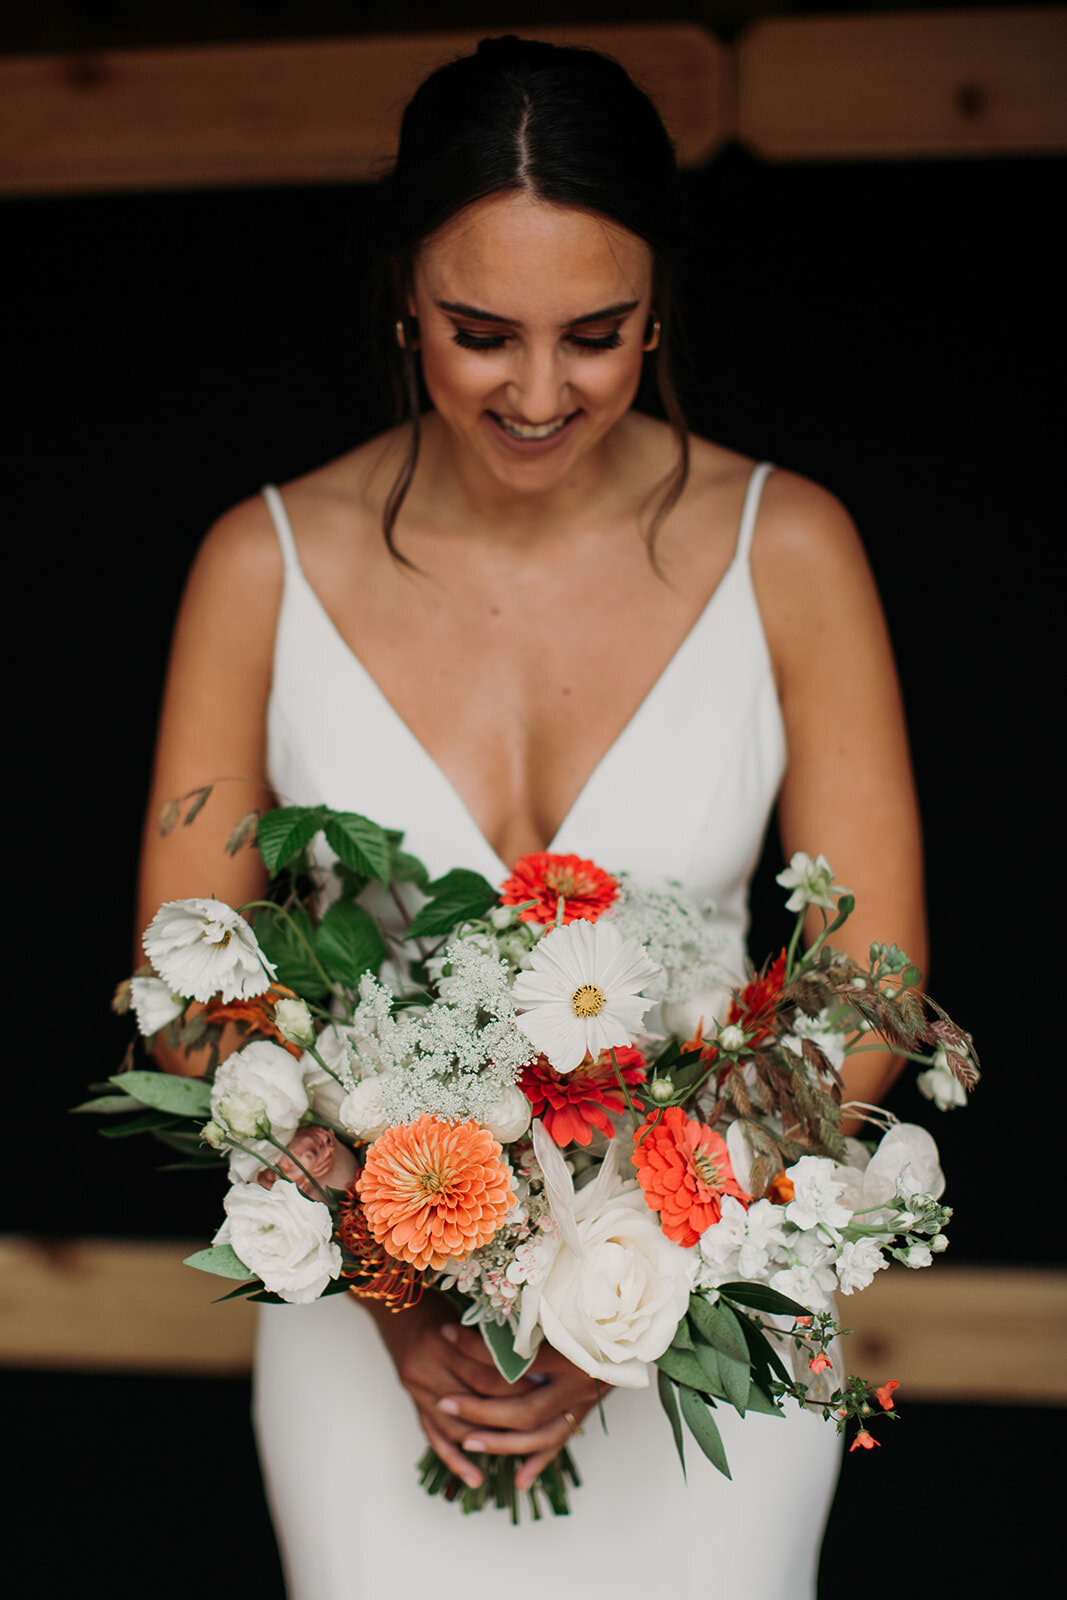 A bride holding a bouquet of flowers.